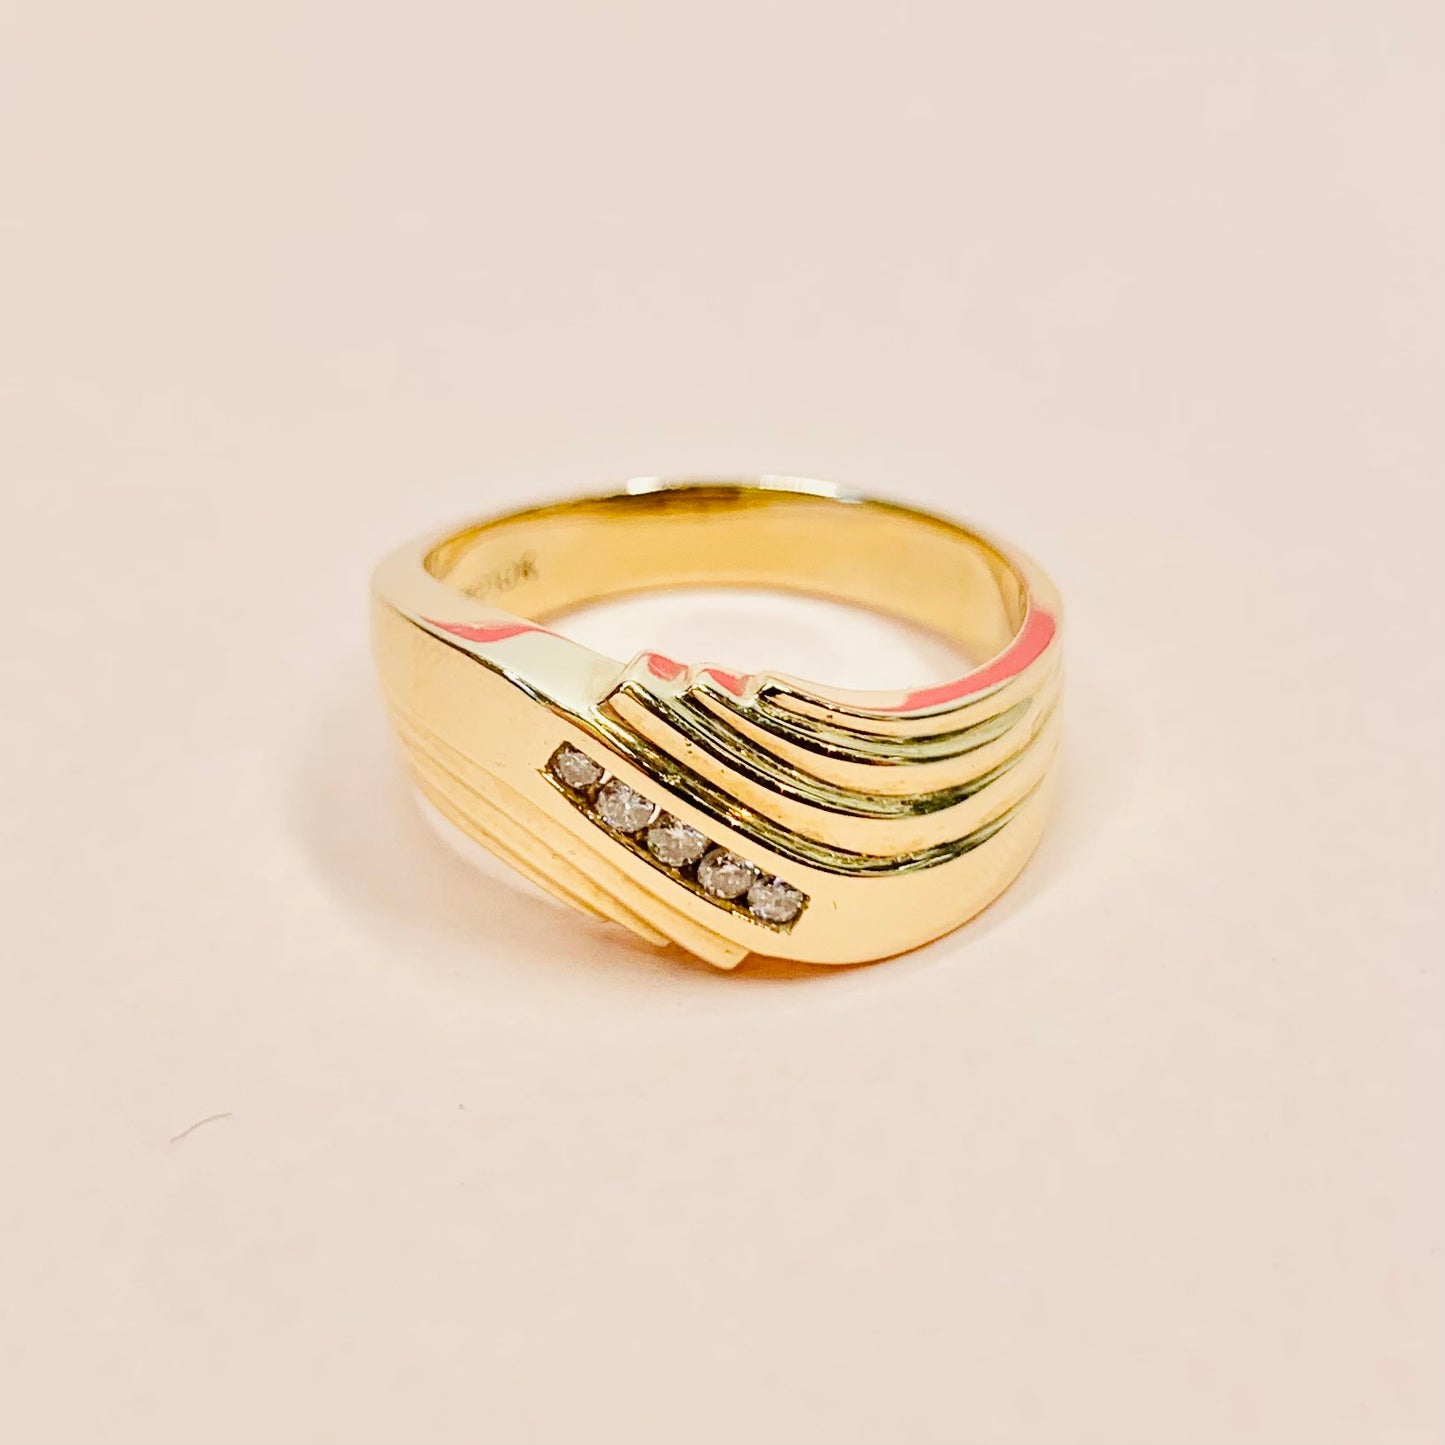 1970s 10K gold ring set with channel diamonds